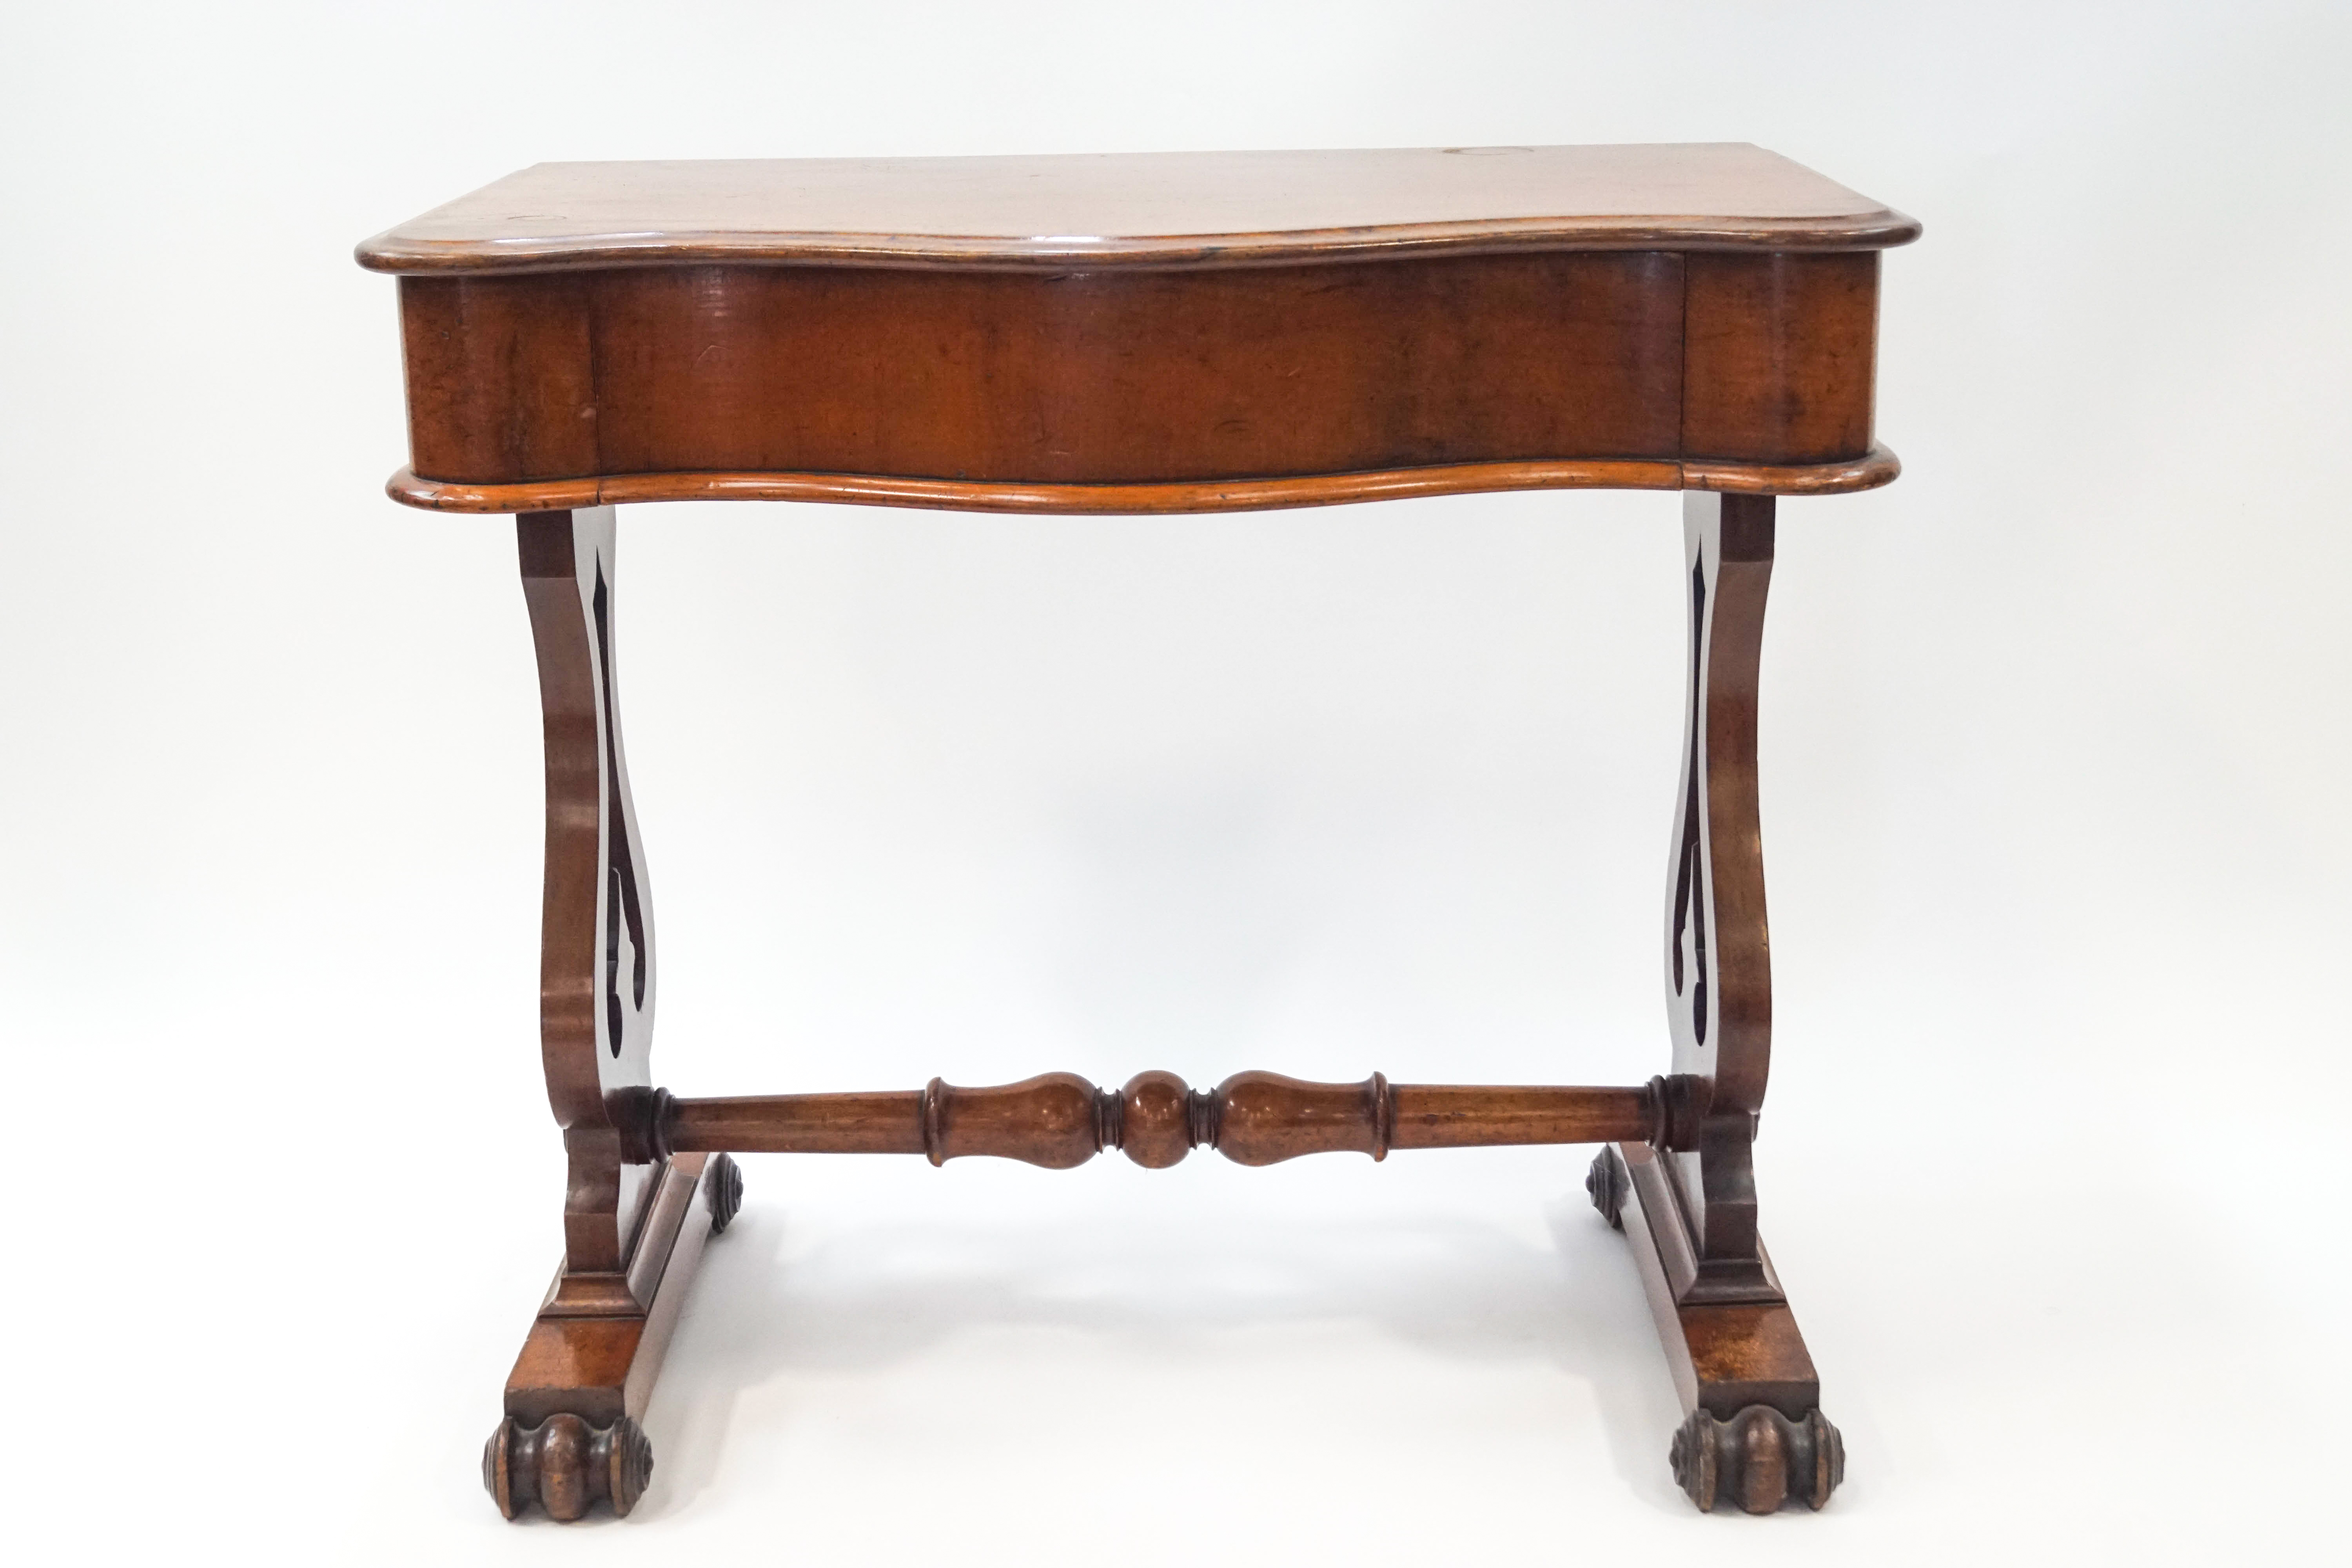 A Victorian mahogany side table with drawer serpentine front on lyre supports joined by a turned